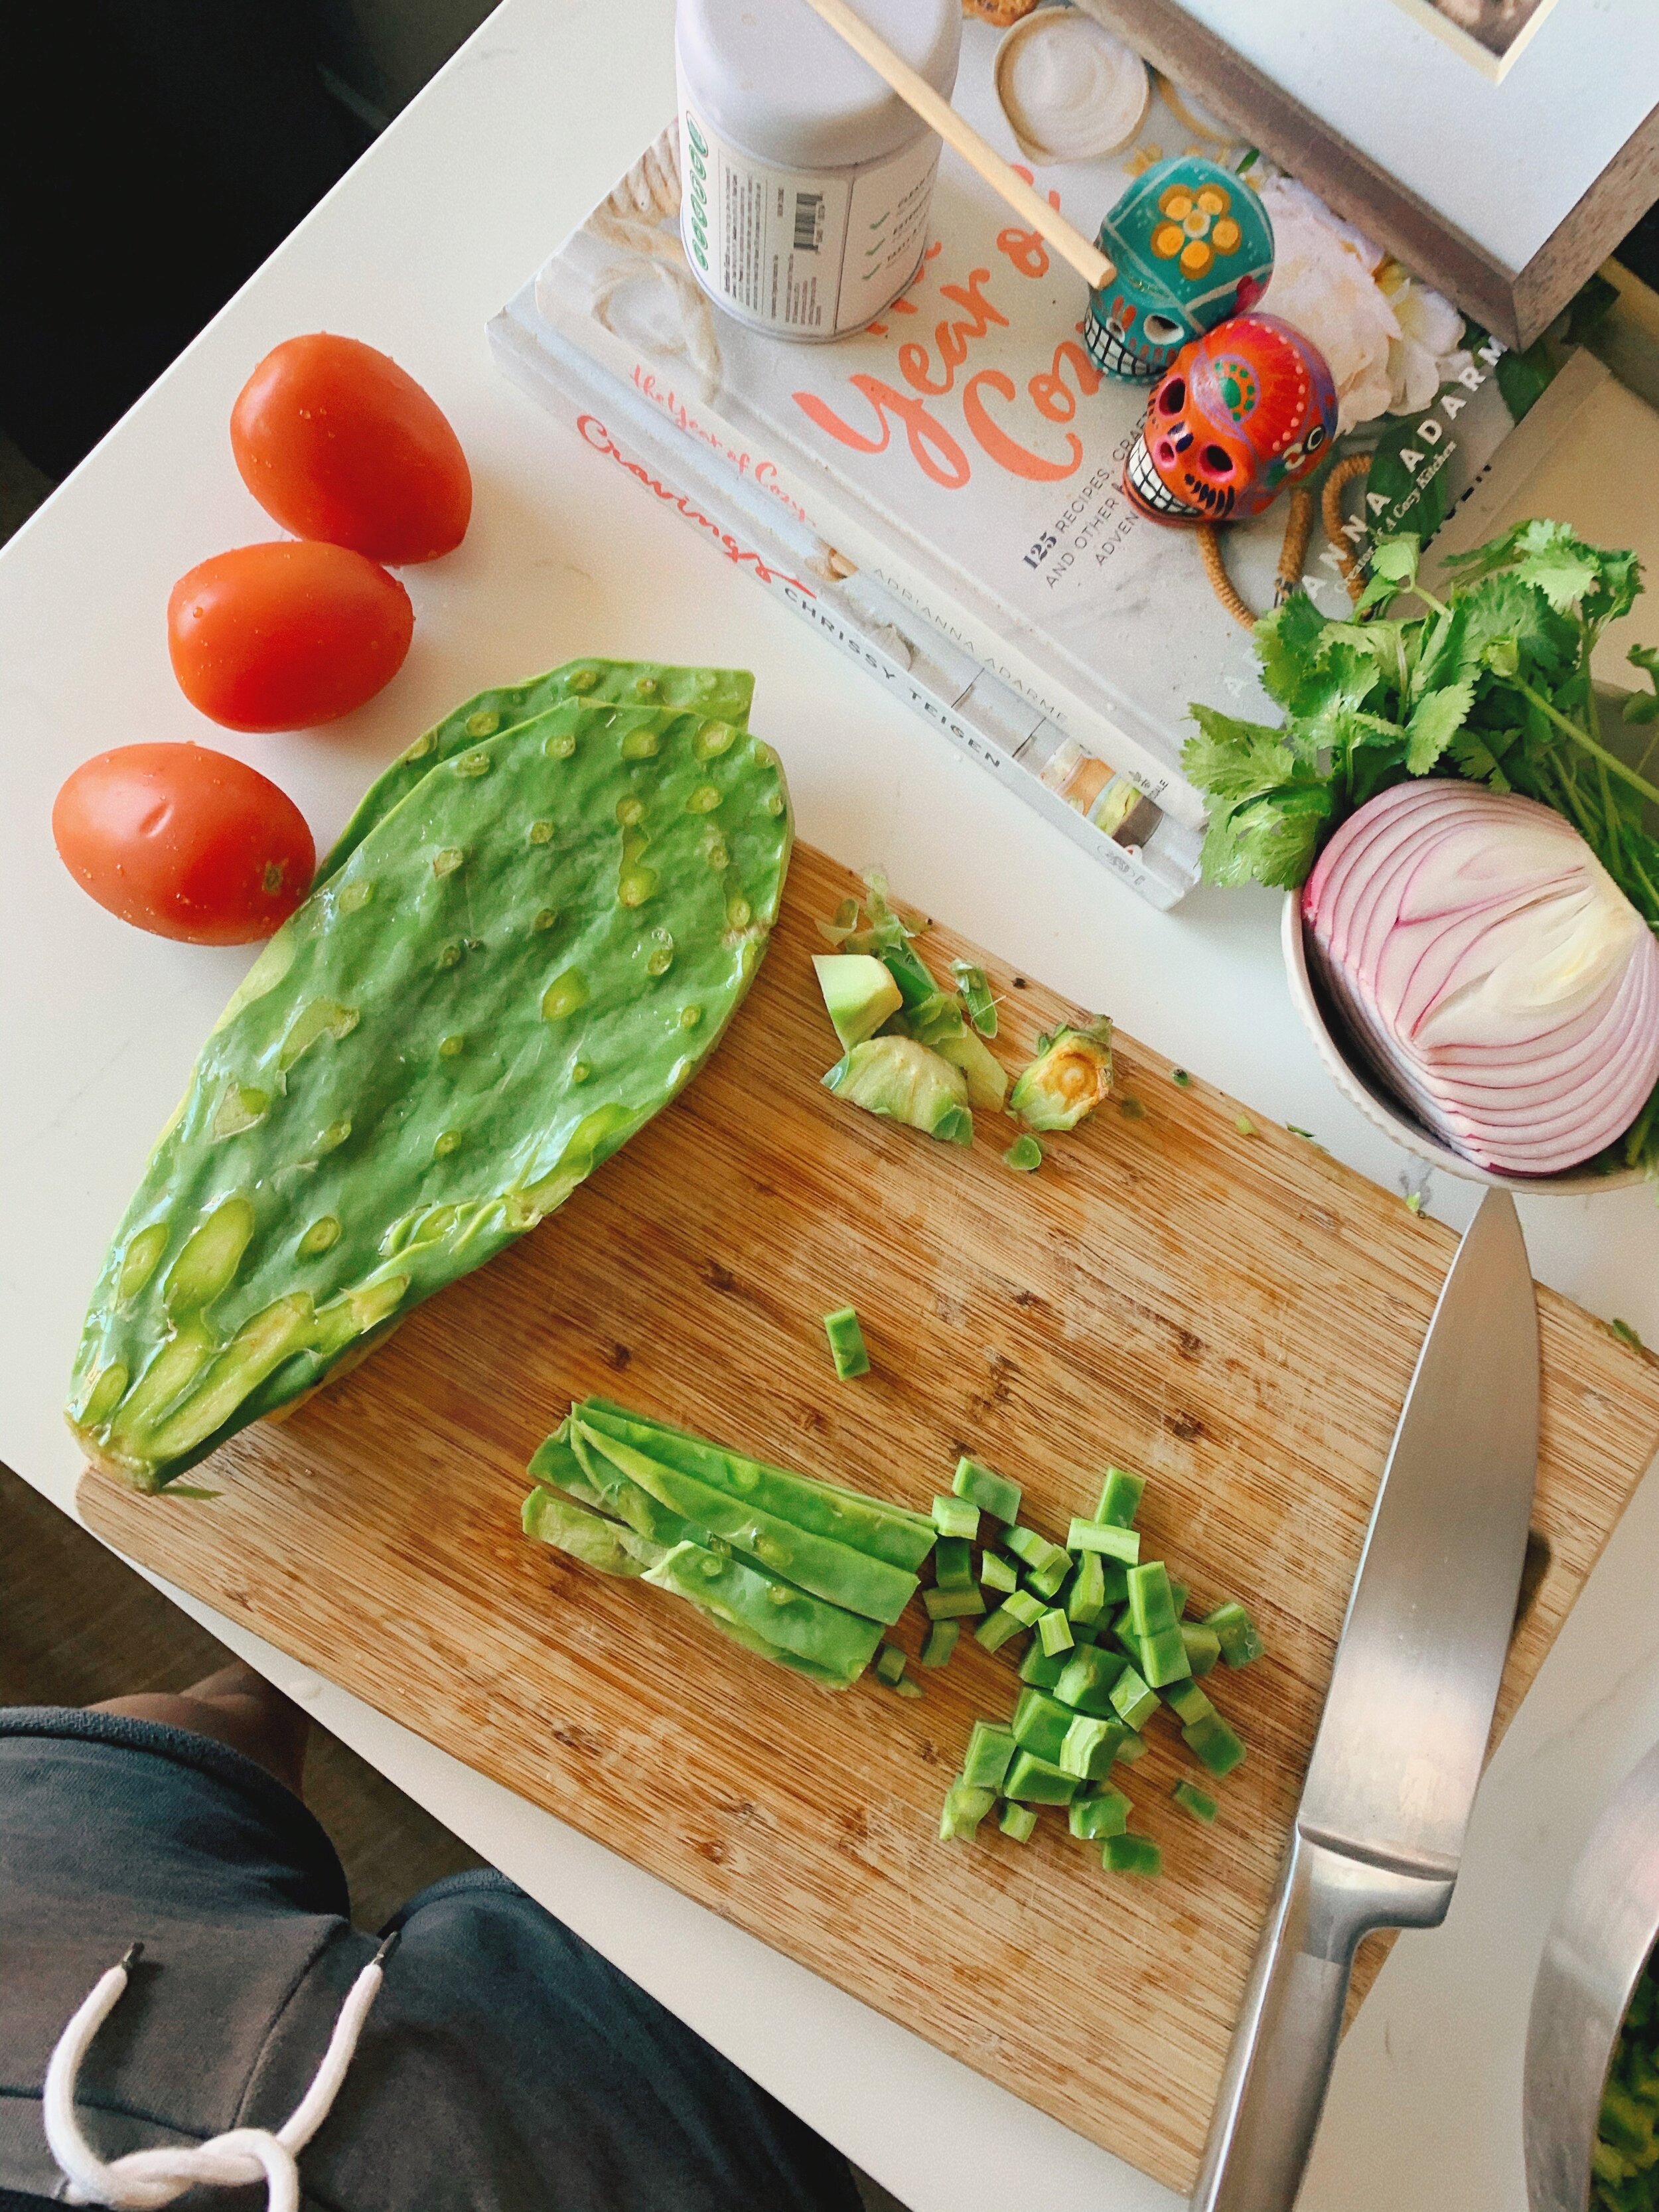 Prepping the ingredients for the Cactus Pico de Gallo